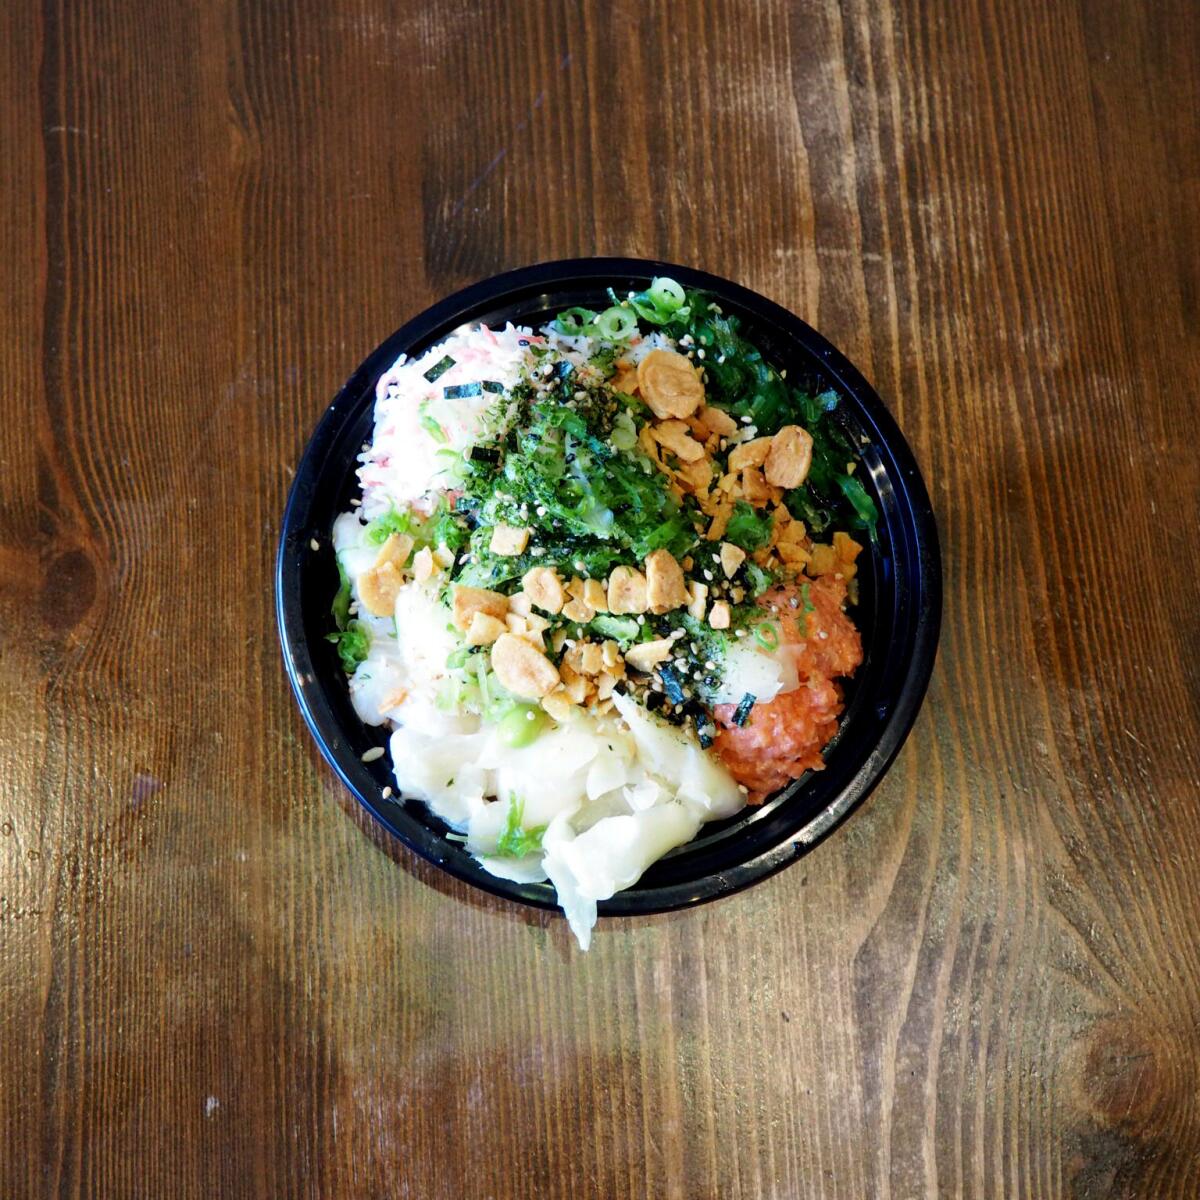 A spicy tuna and scallop poke bowl with brown rice, green onion, pickled ginger, seaweed salad, imitation crab, sesame seeds and furikake.